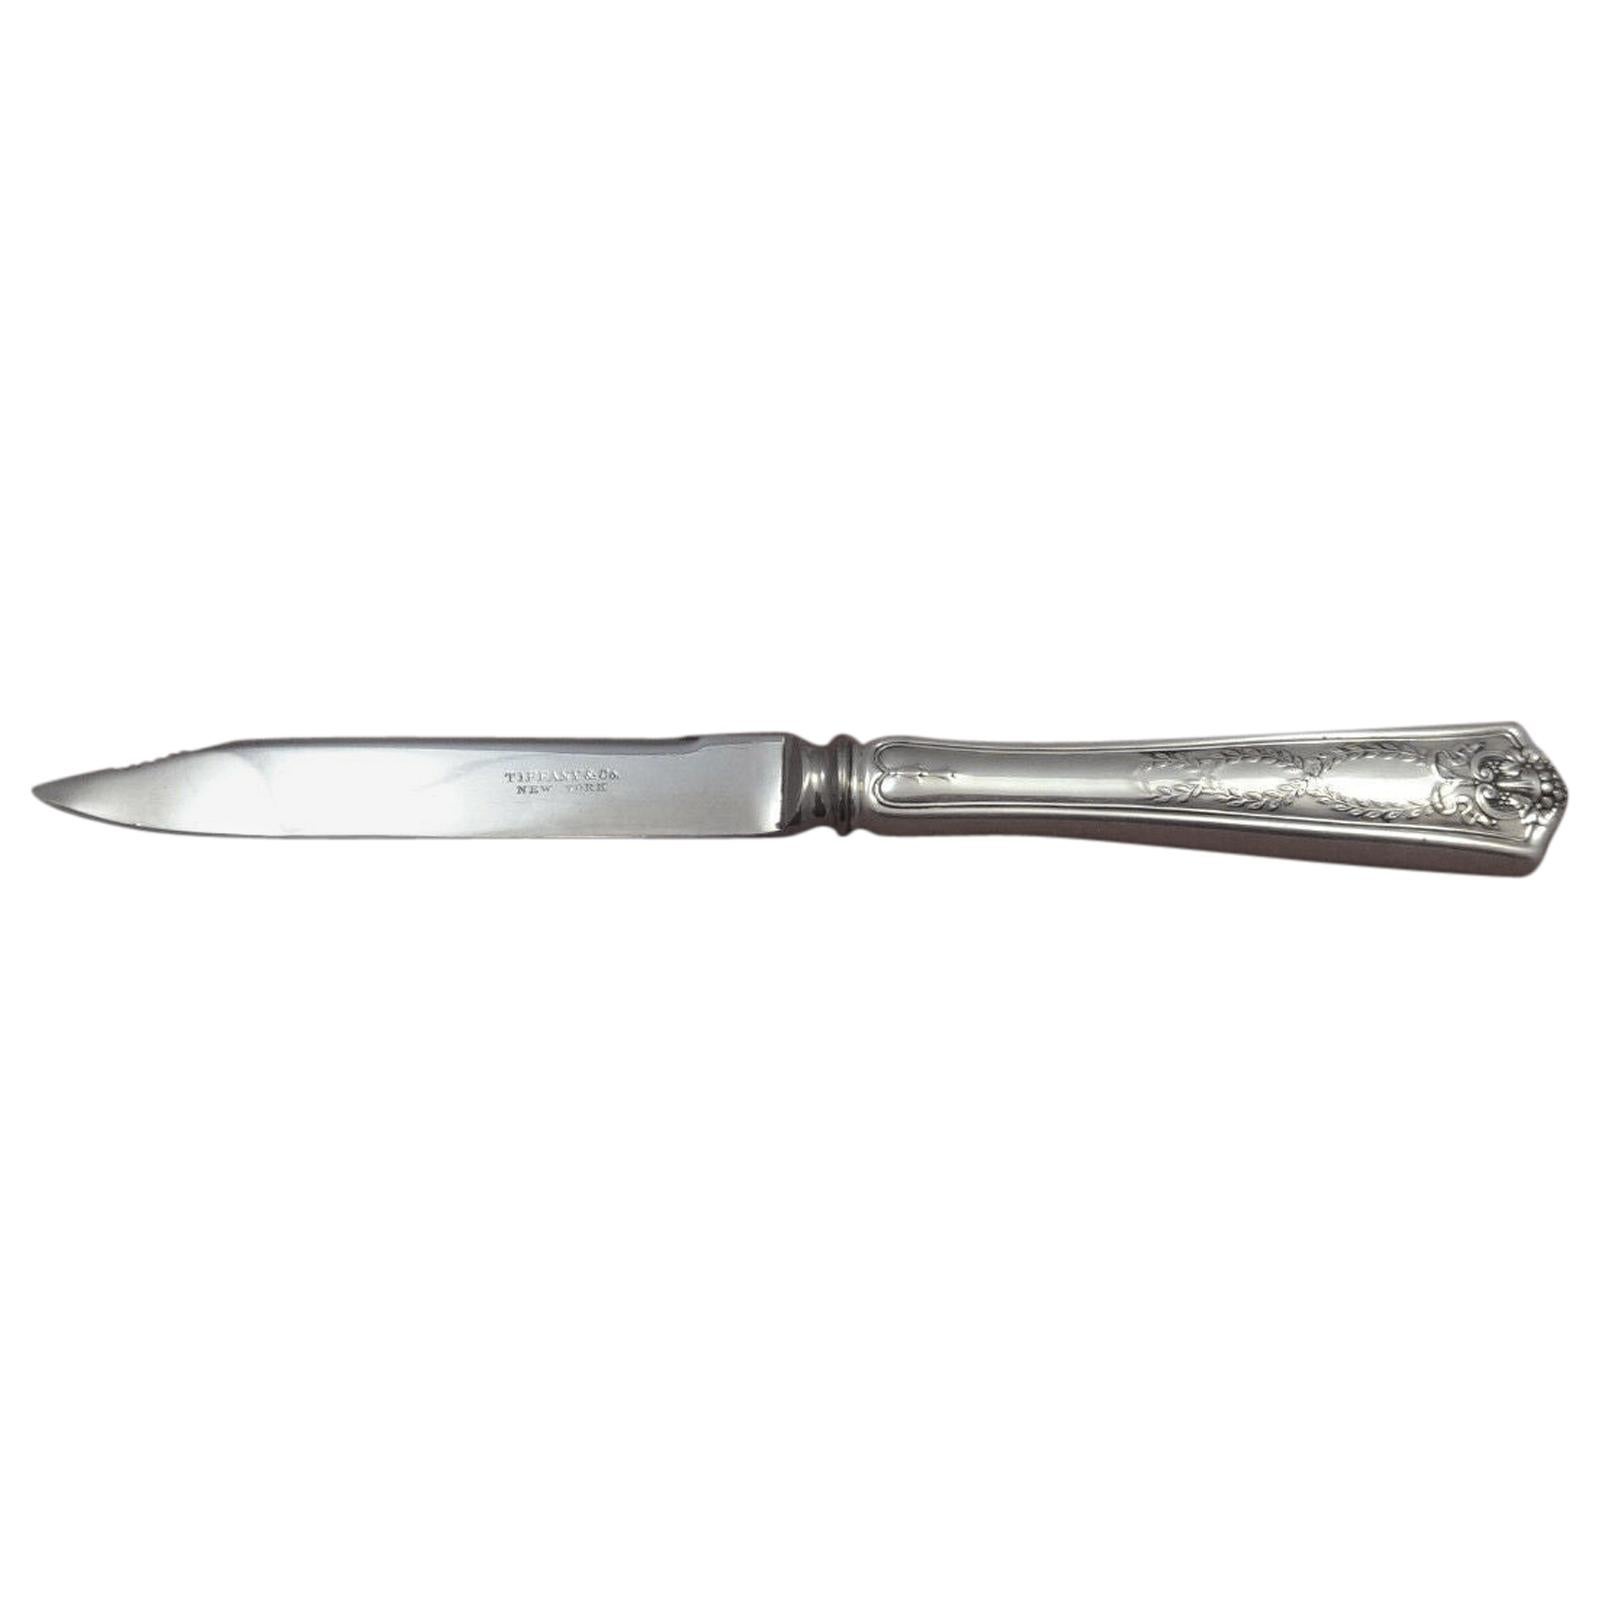 Winthrop by Tiffany & Co. Sterling Silver Fruit Knife HH with Plated Blade